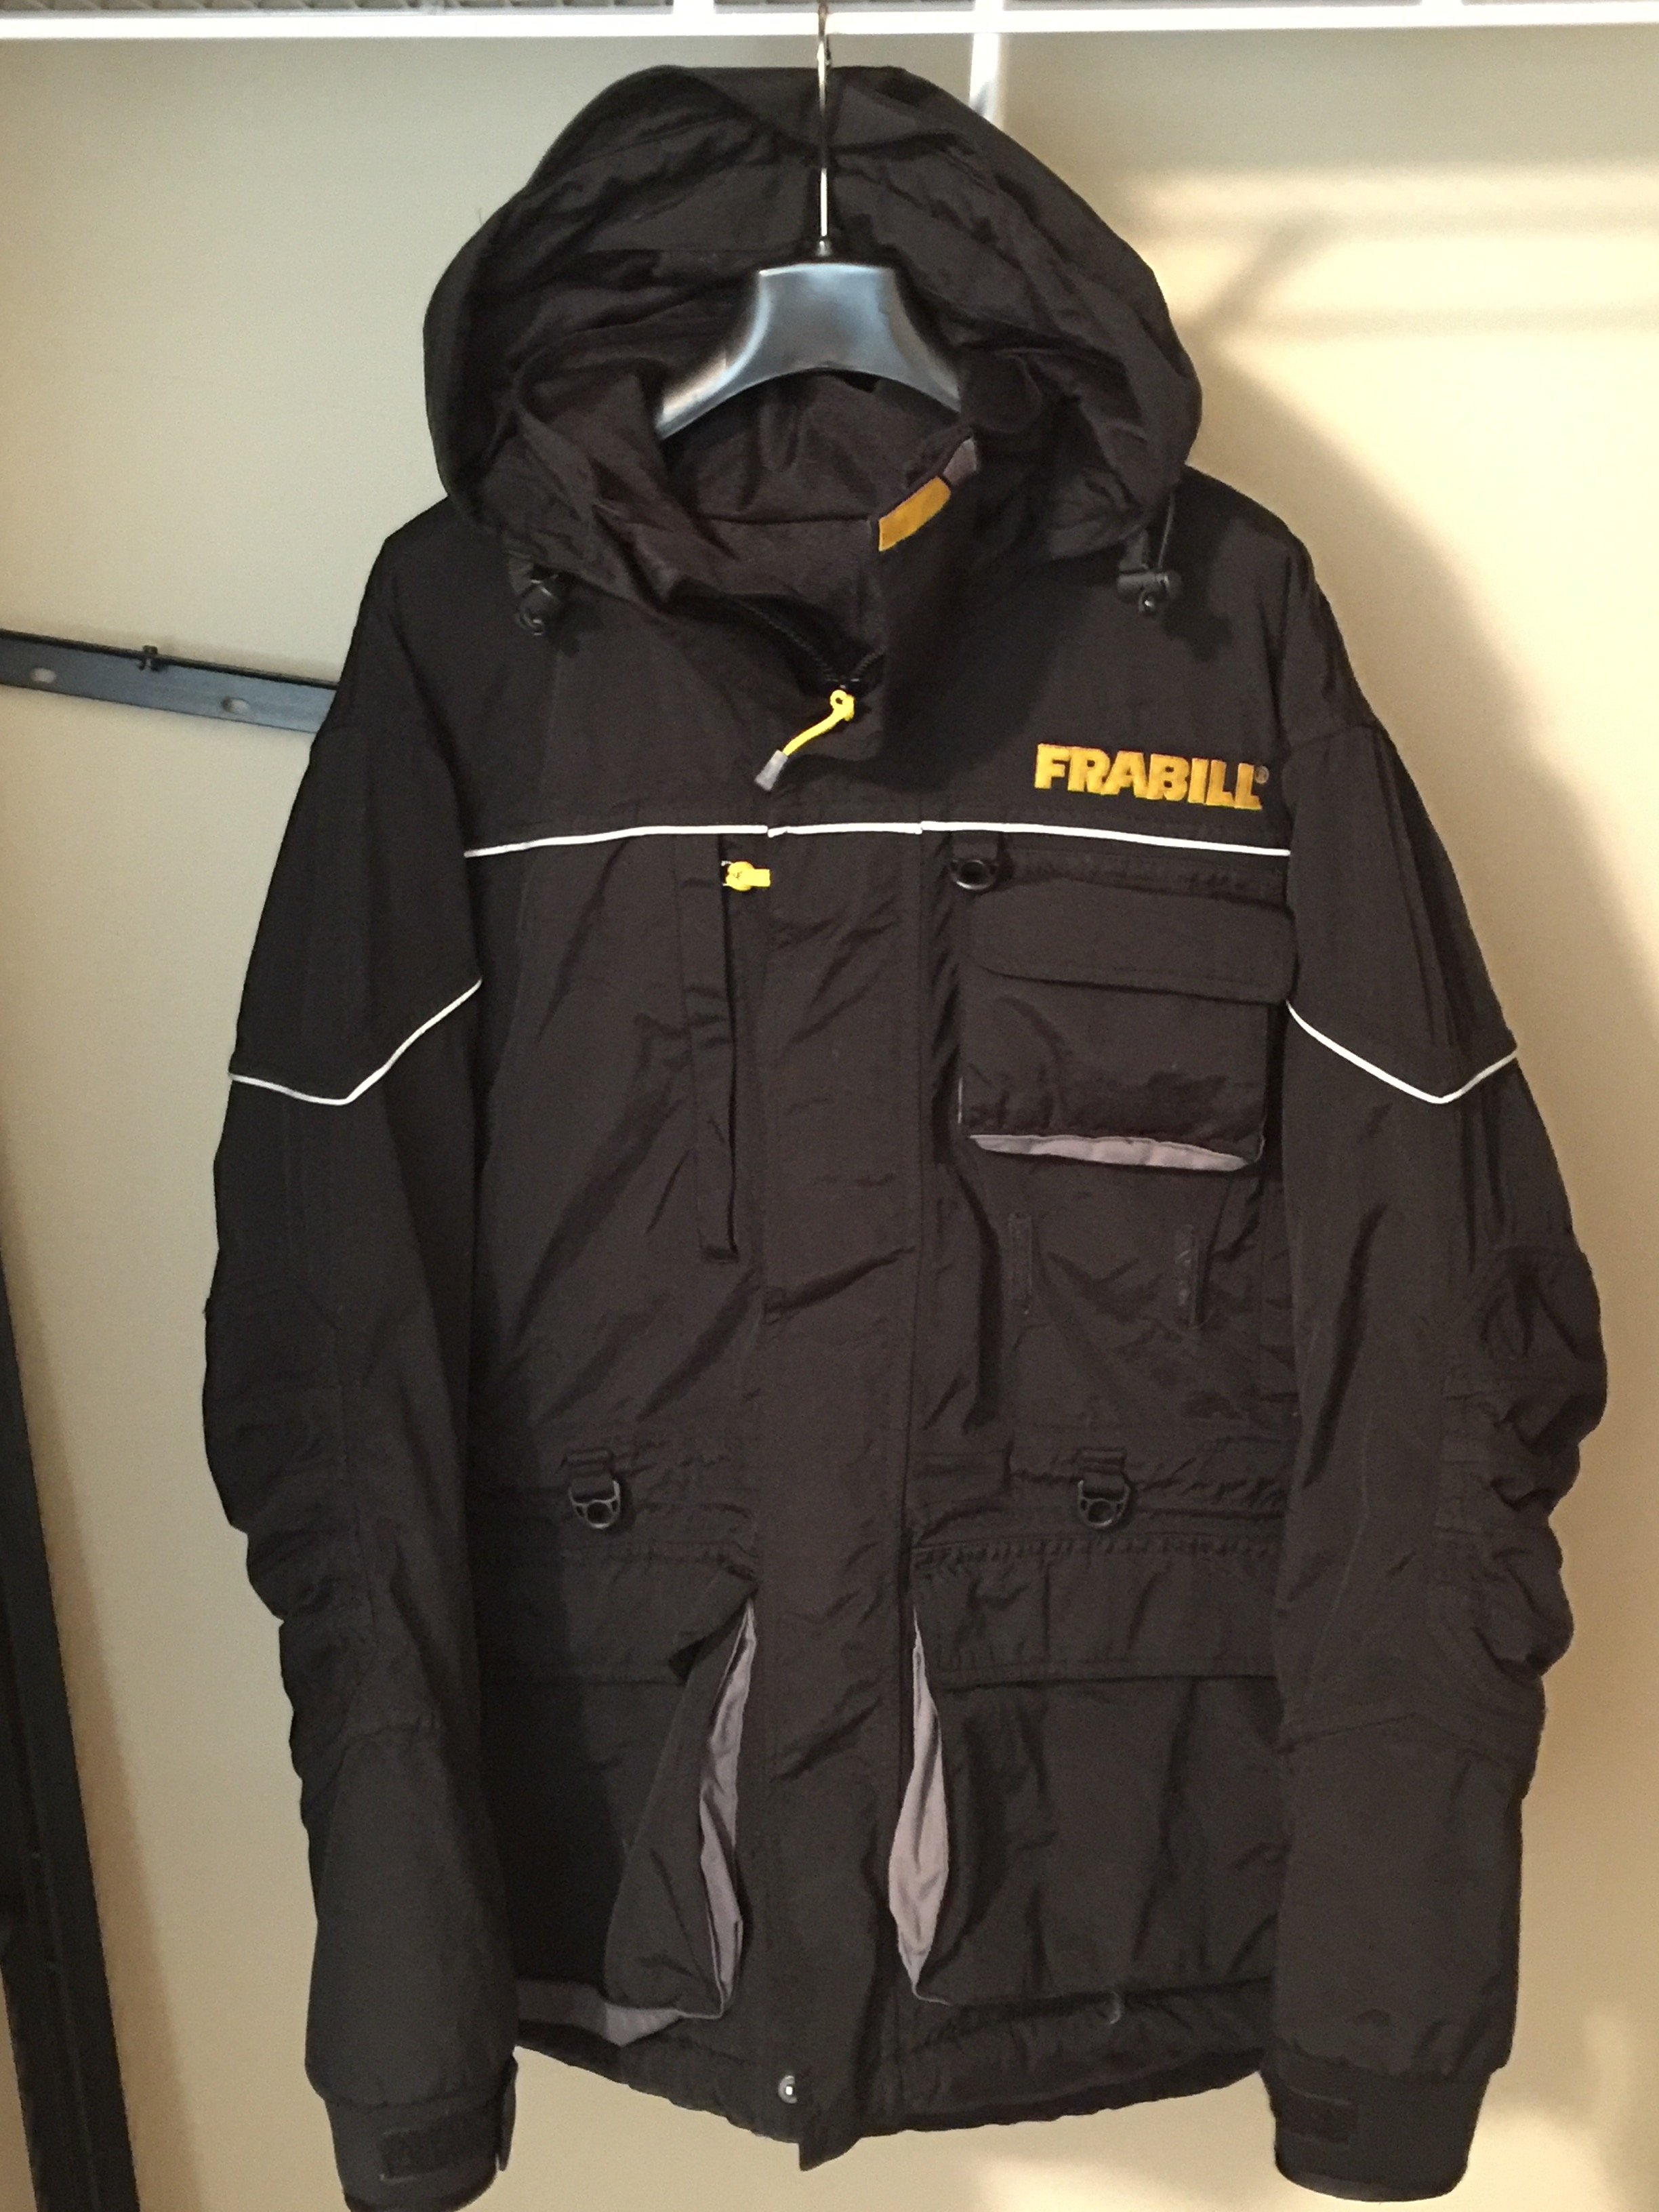 Frabill Heavy Ice Fishing Suit Size Medium (Make Offer